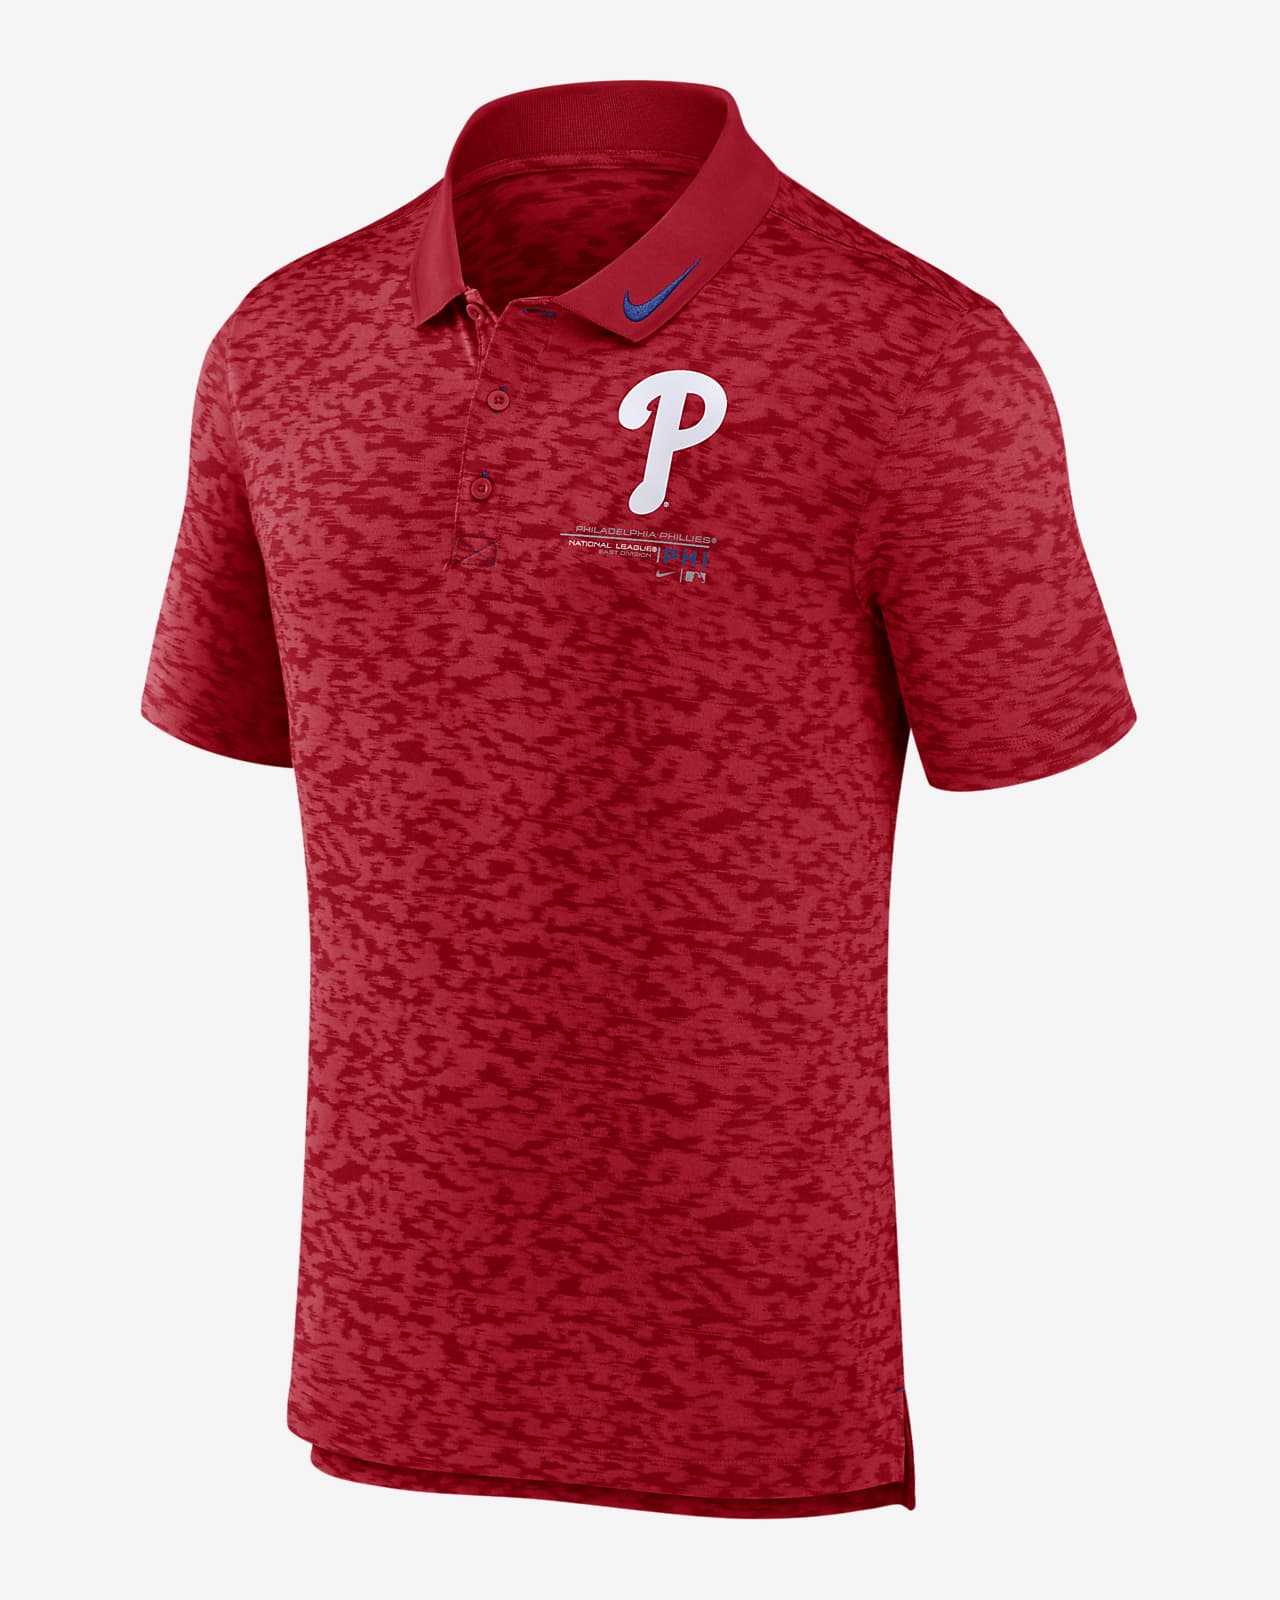 Braves Red Jersey. Nike next level